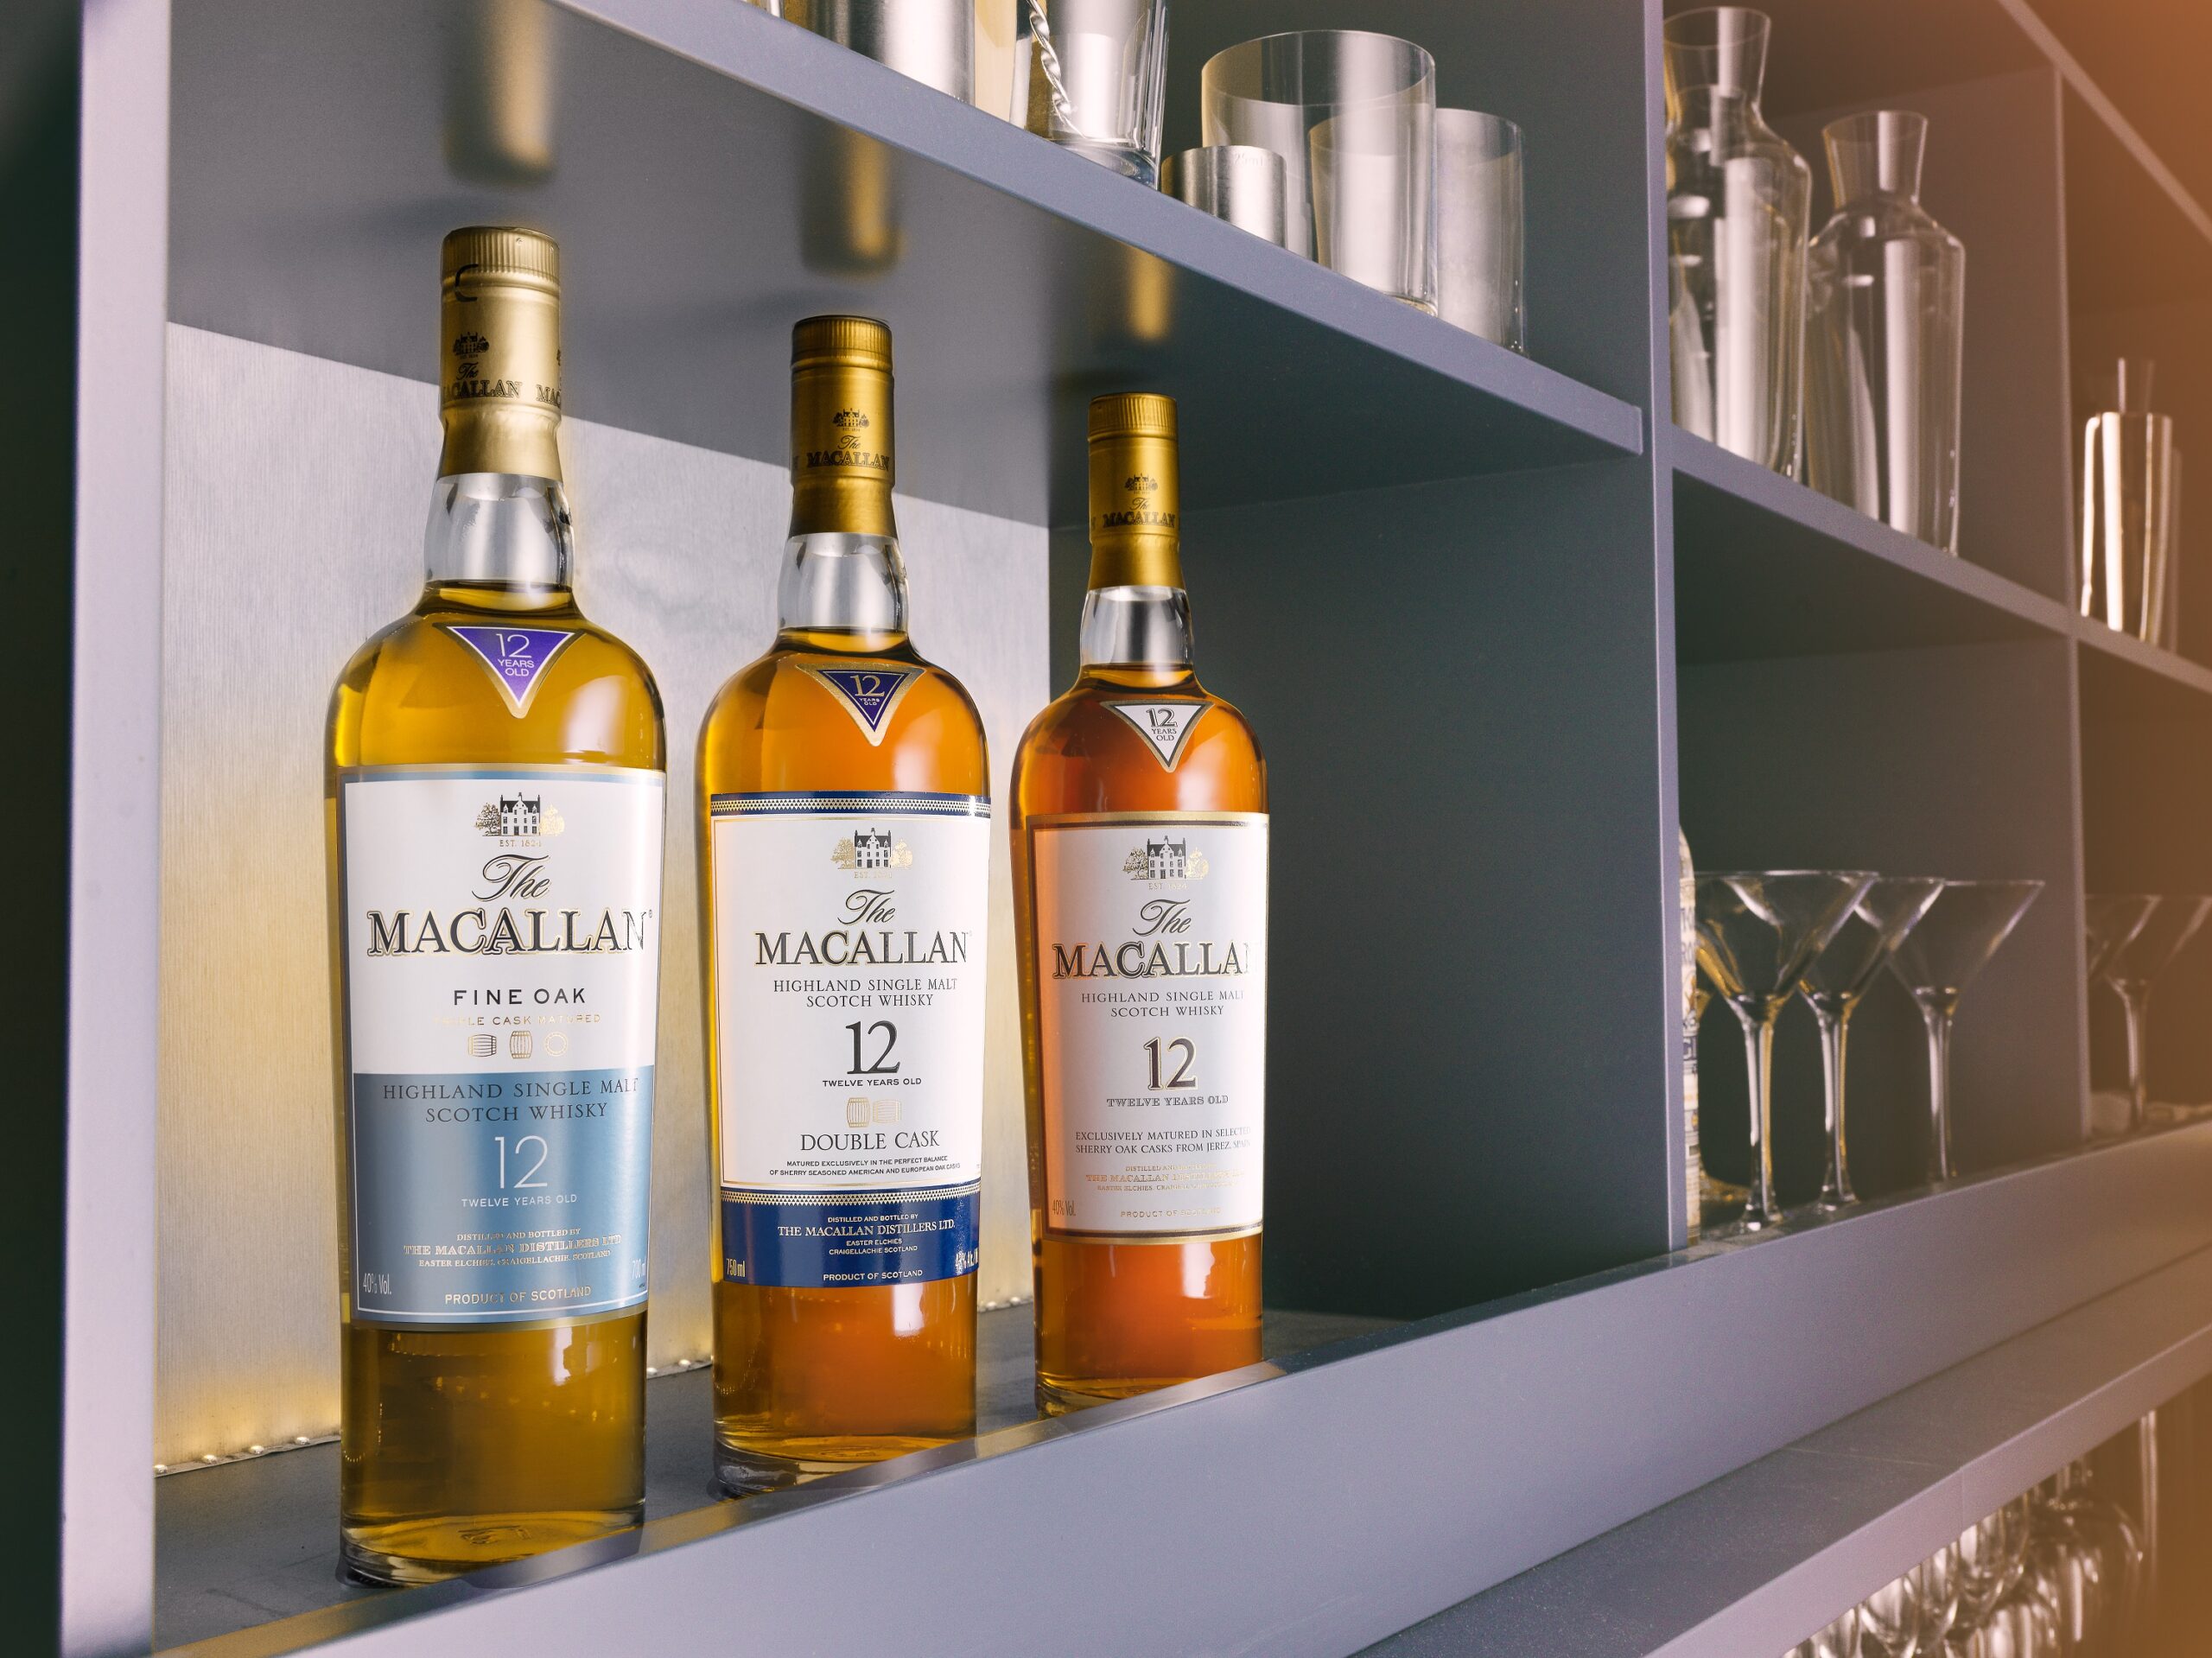 The Macallan 12 year old trio